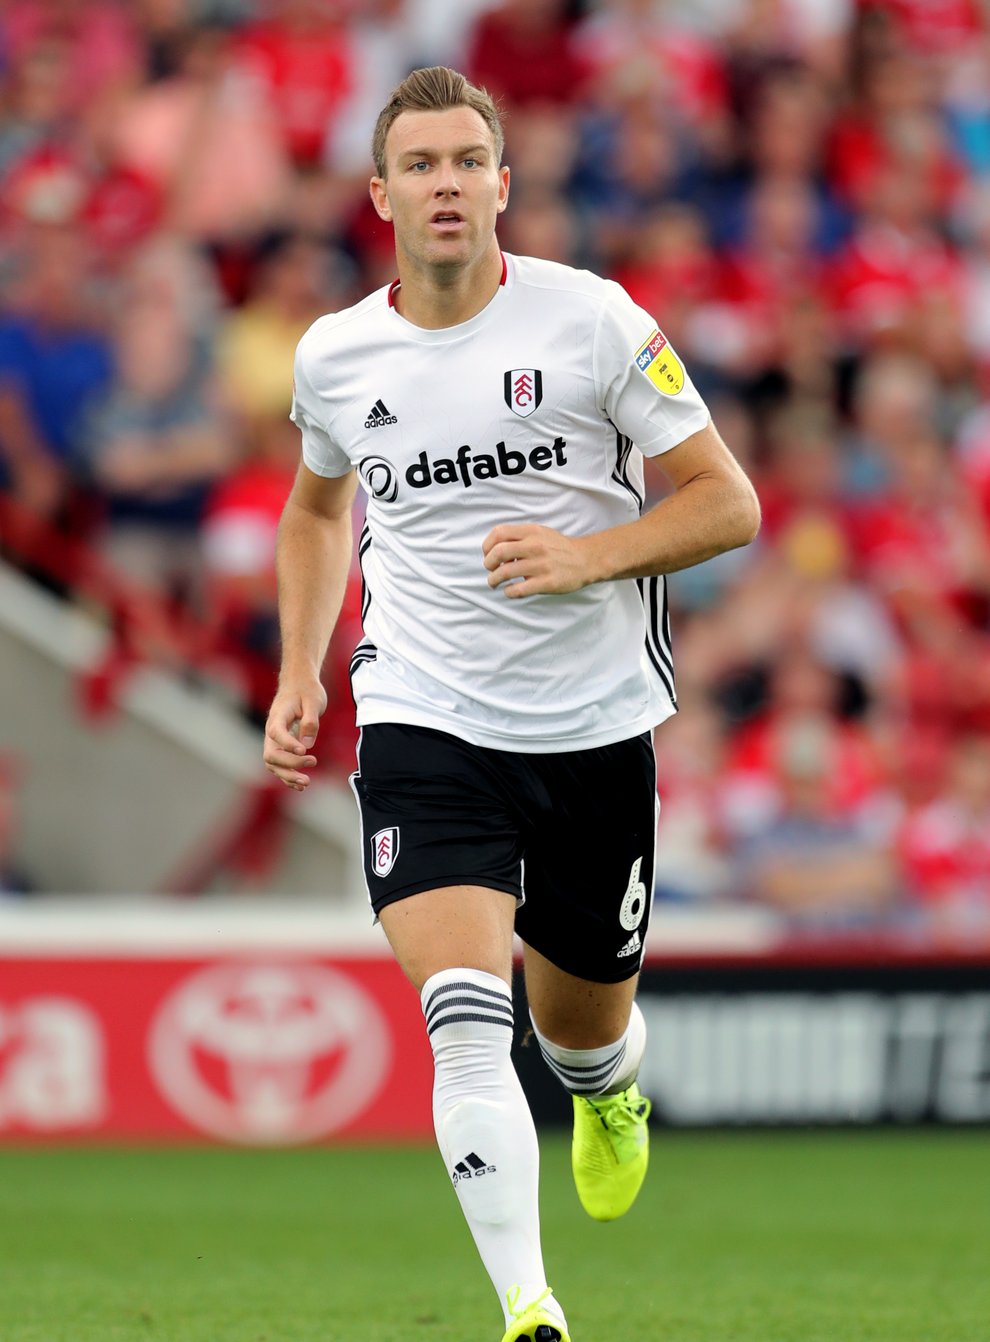 Former Fulham midfielder Kevin McDonald has been training with Dundee United (Richard Sellers/PA)